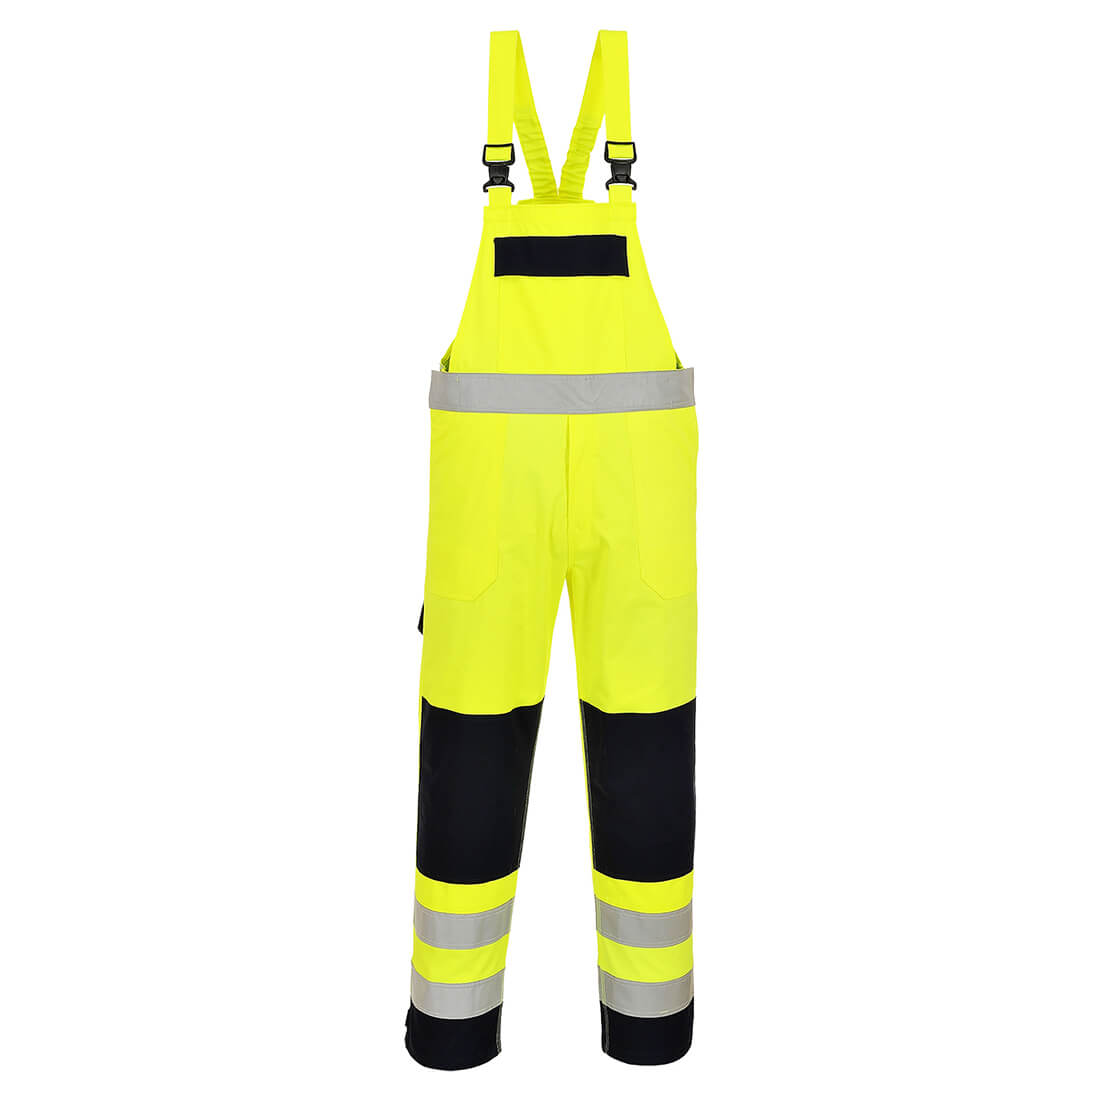 Image of Biz Flame Hi Vis Multi-Norm Flame Resistant Bib and Brace Yellow / Navy 2XL